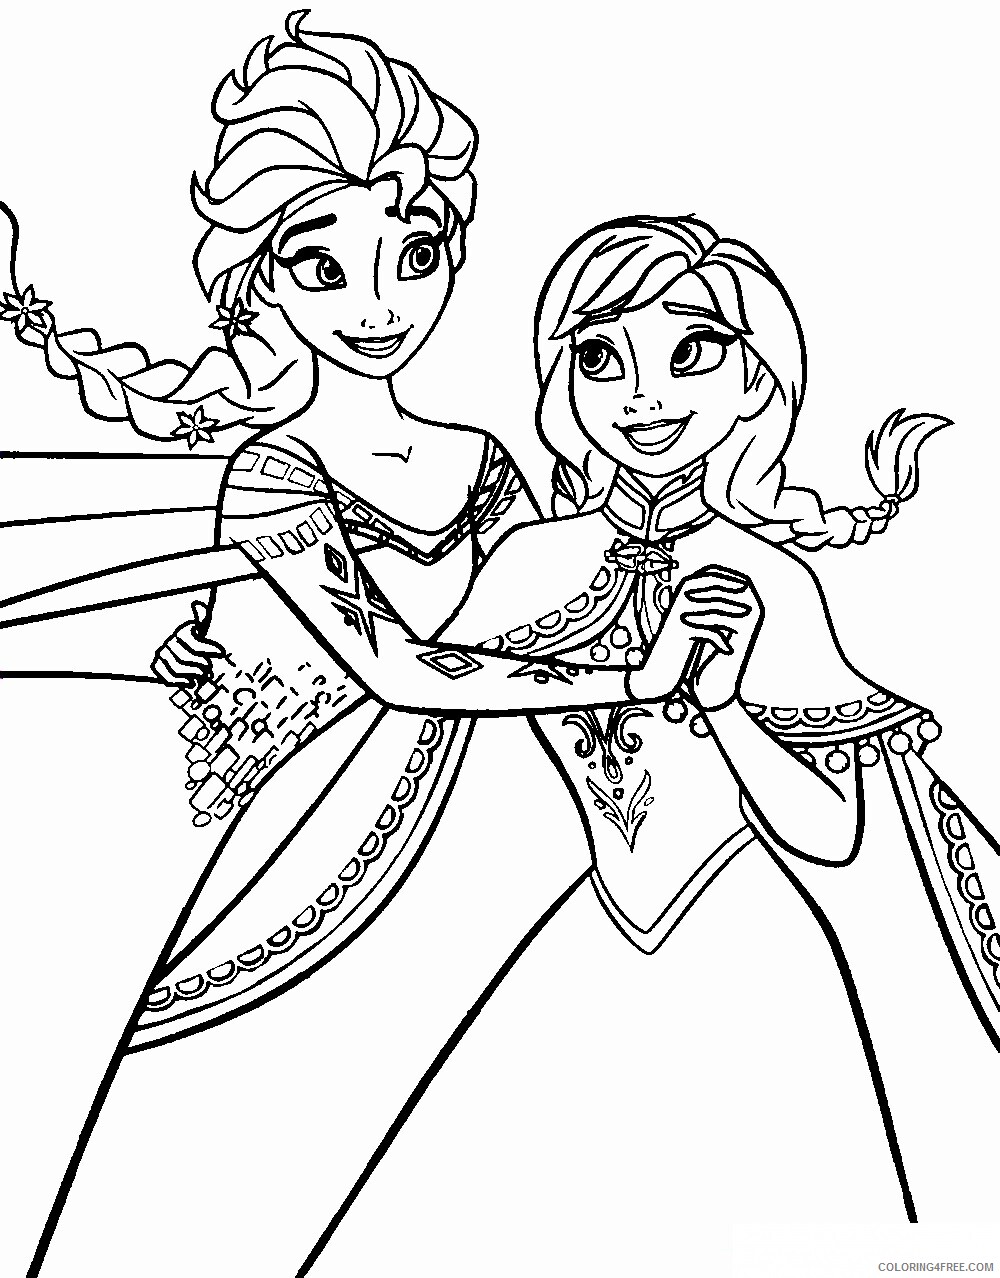 Anna Frozen Coloring Pages Printable Sheets Anna Frozen Page New 2021 a 1489 Coloring4free